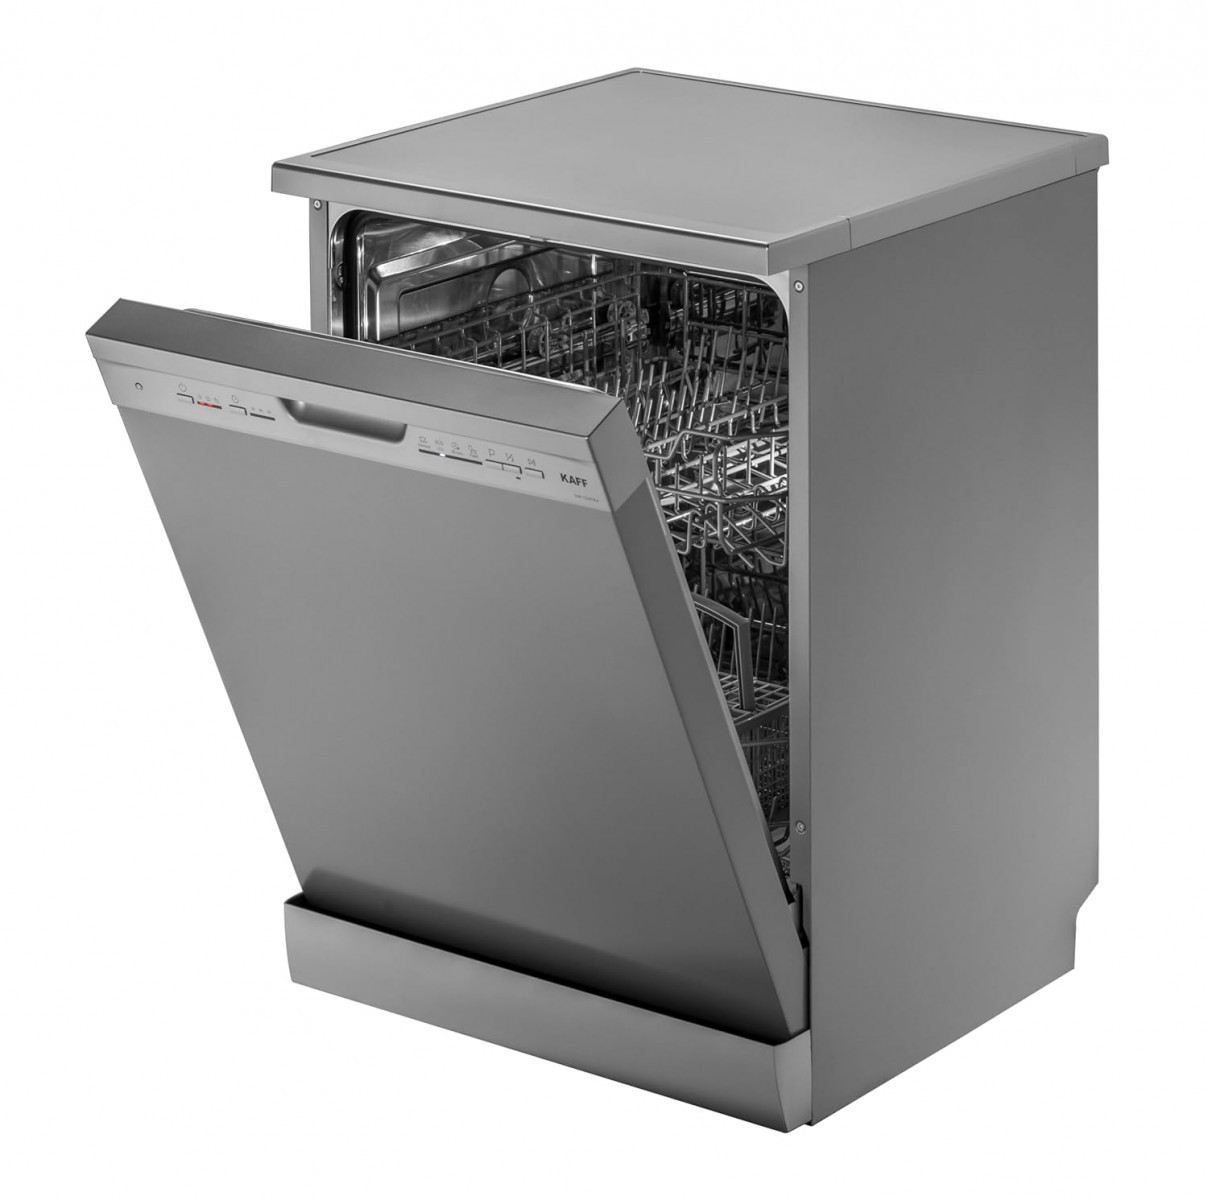 KAFF Centra 12 Place Settings Free Standing Dishwasher with Digital Display 3 Stage Filtration